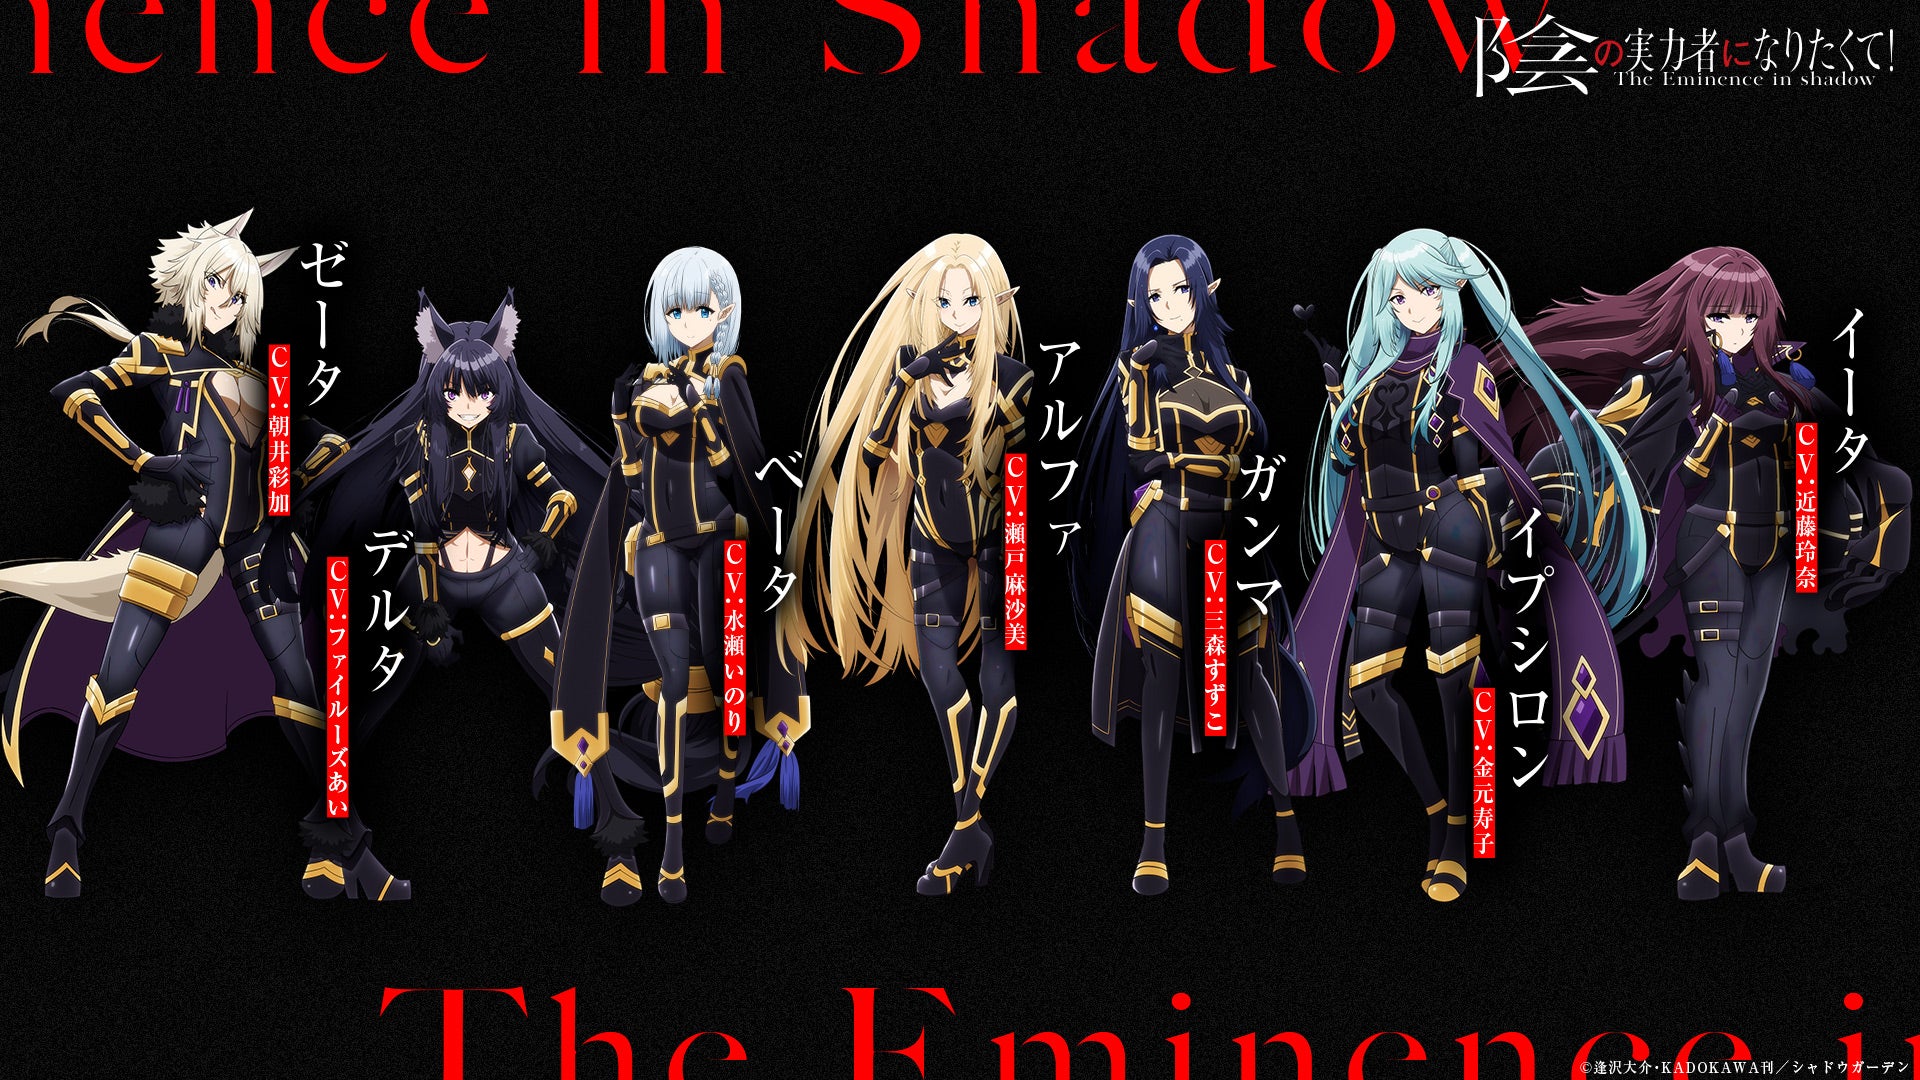 The Eminence in Shadow New Character Visuals